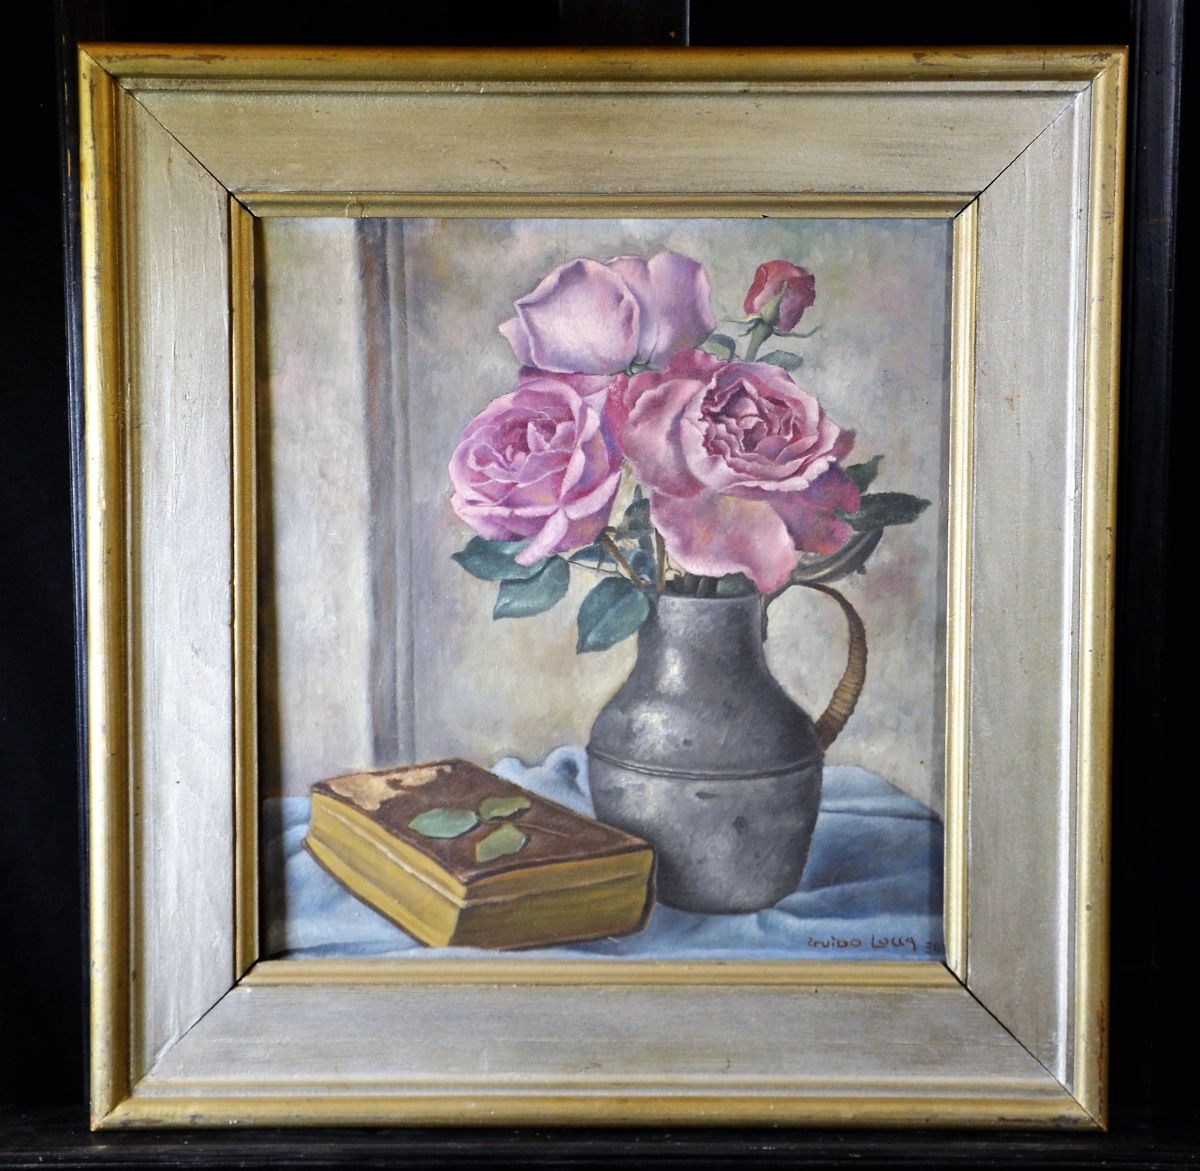 Oil on canvas Roses in vase, signed Guido Lucca, 1936. 42 x 37cm.